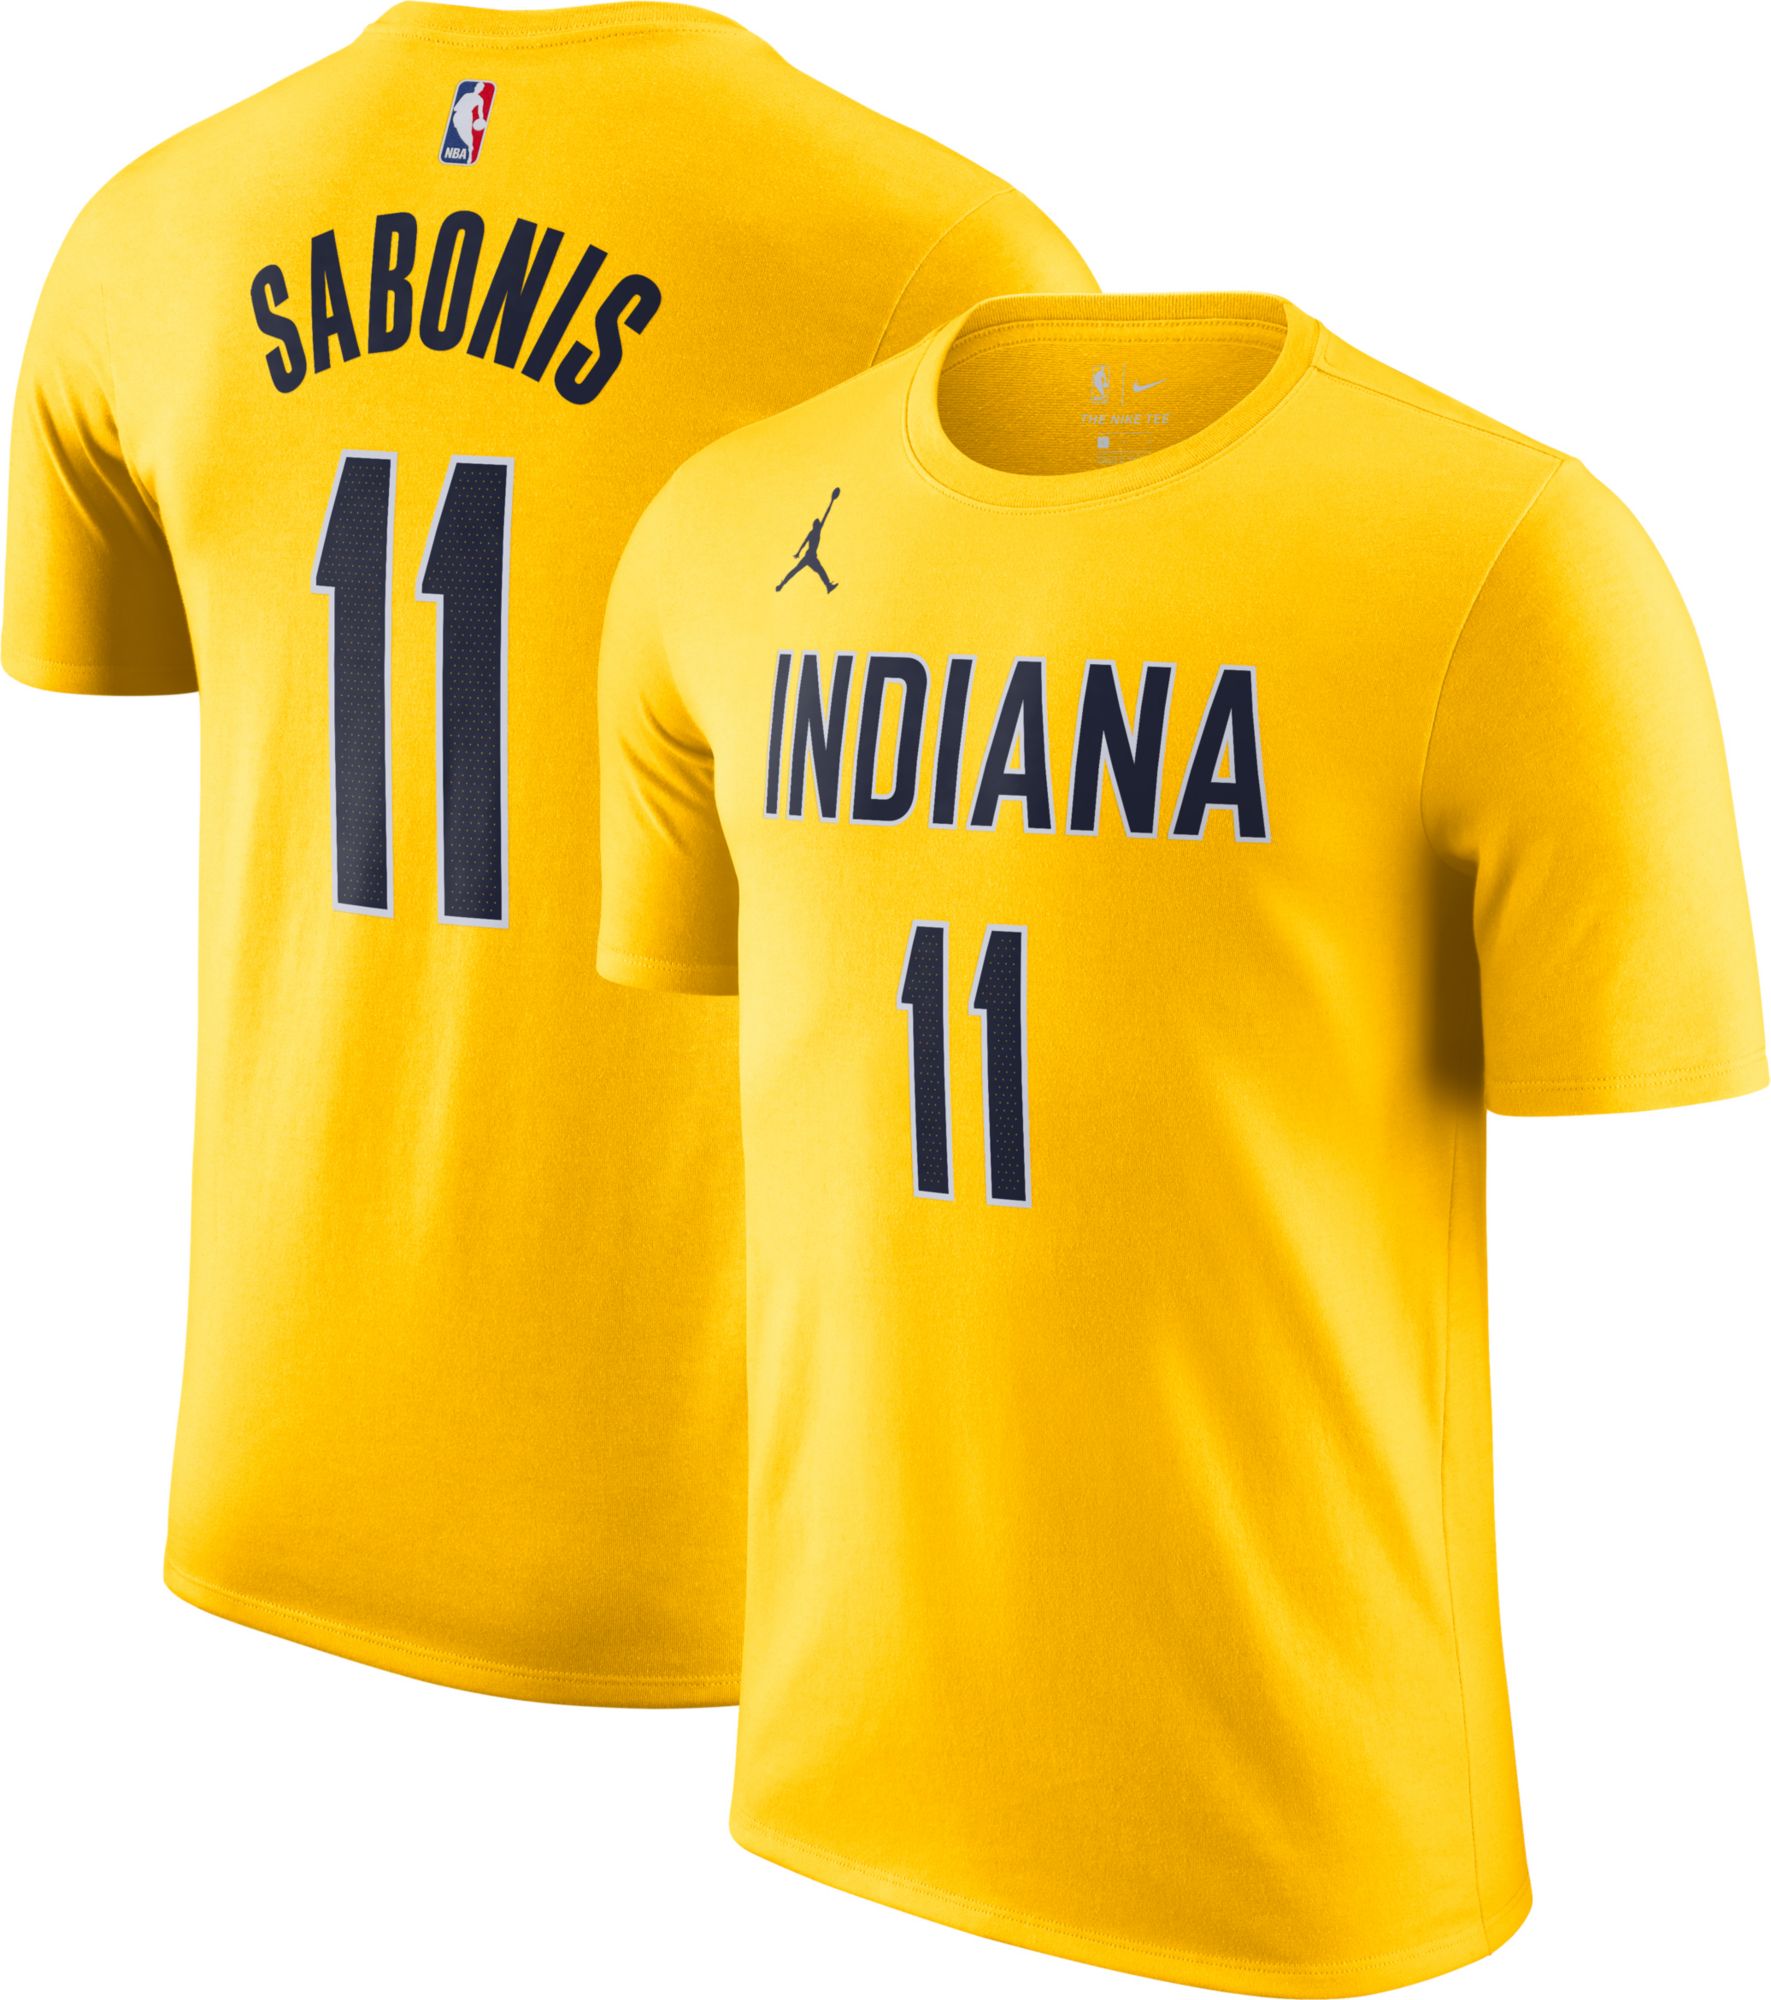 Indiana Pacers City Edition Men's Nike NBA Long-Sleeve T-Shirt